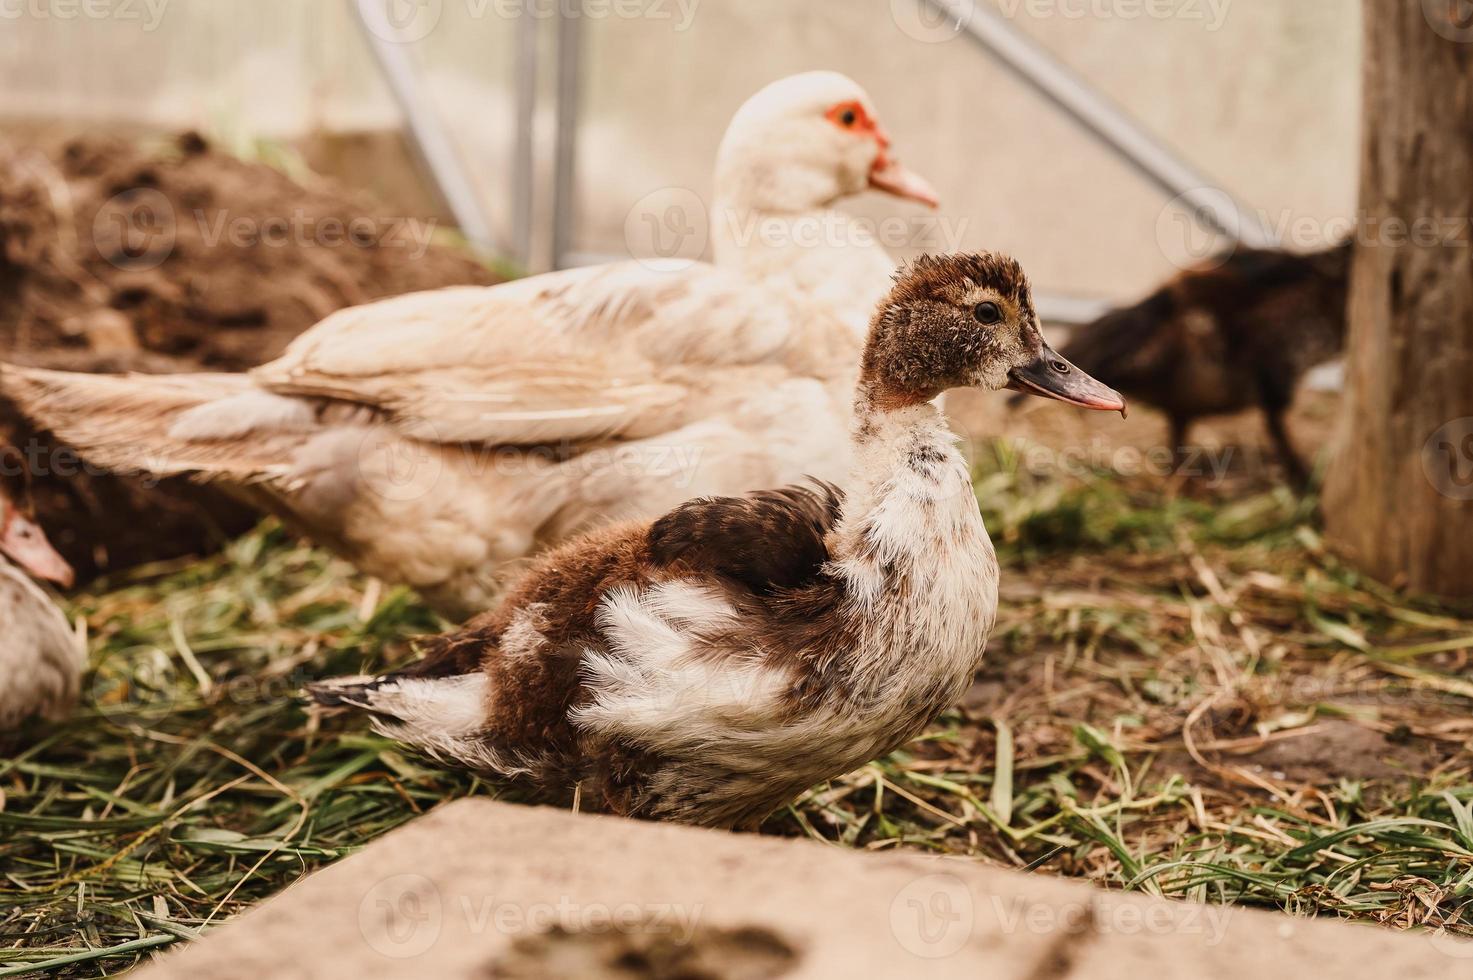 musk or indo duck on a farm in a chicken coop photo